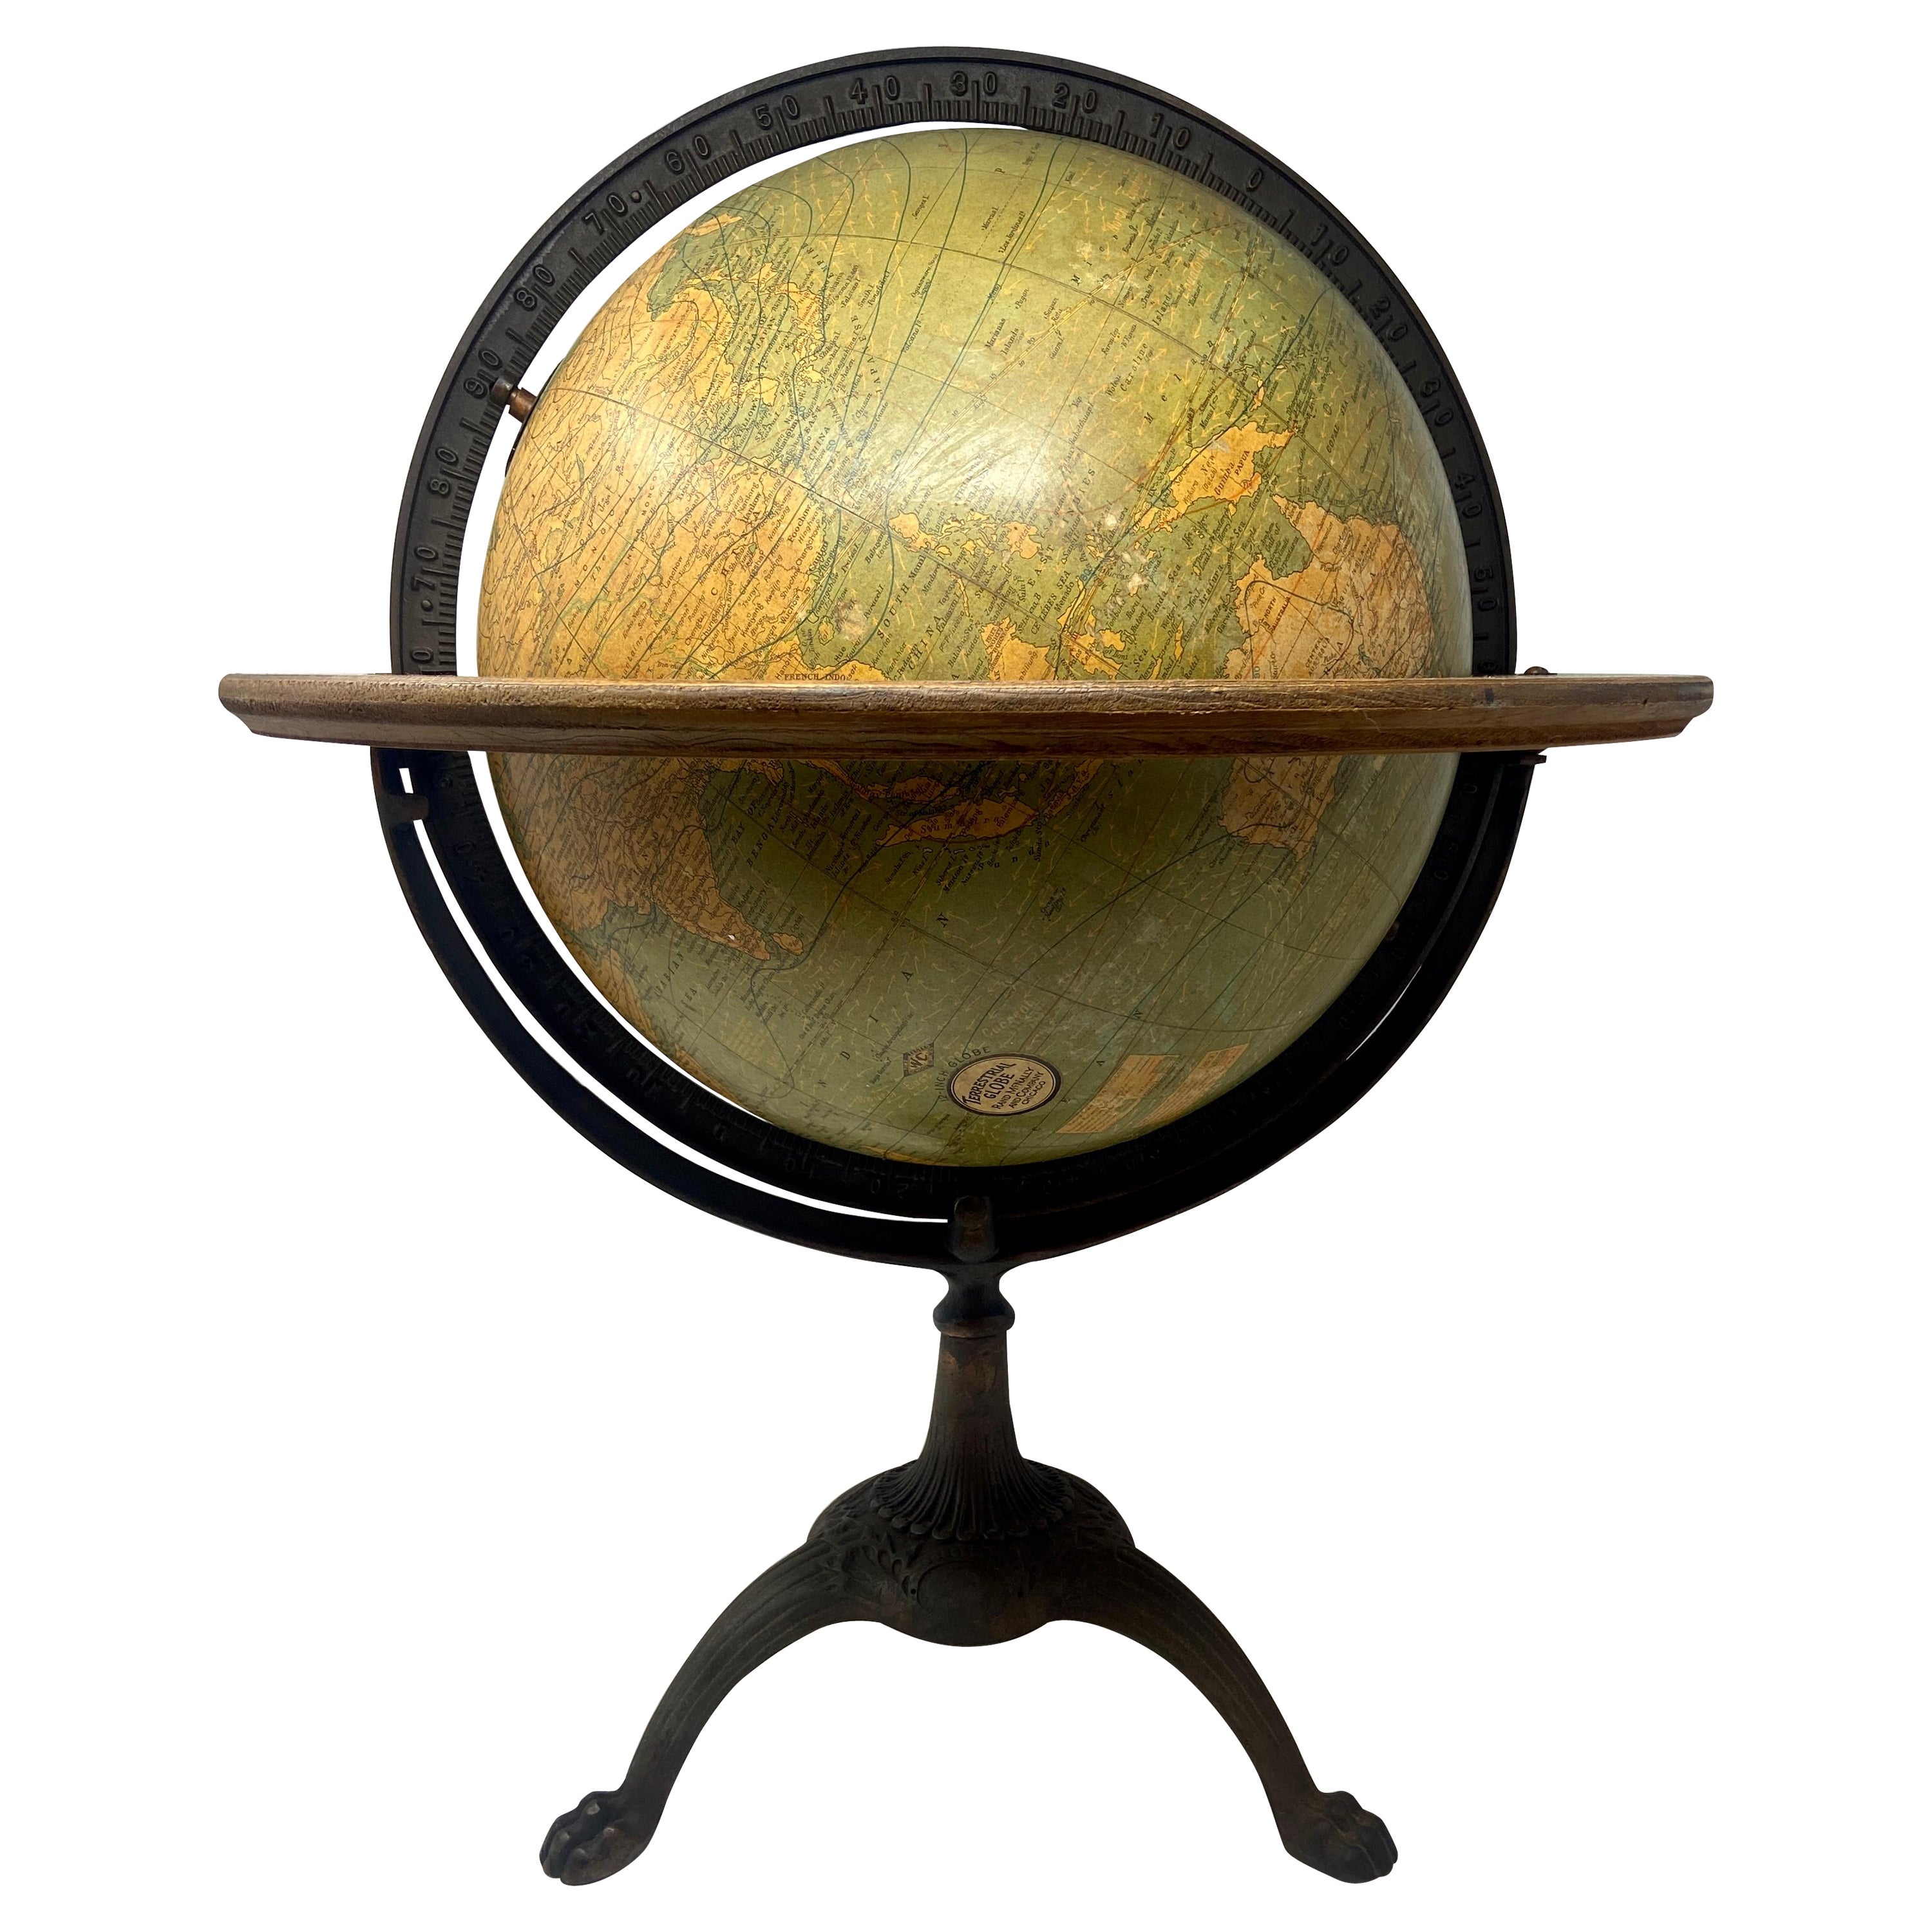 Antique American "Rand Menally Co." Chicago Table-Top Globe on Stand, Circa 1900